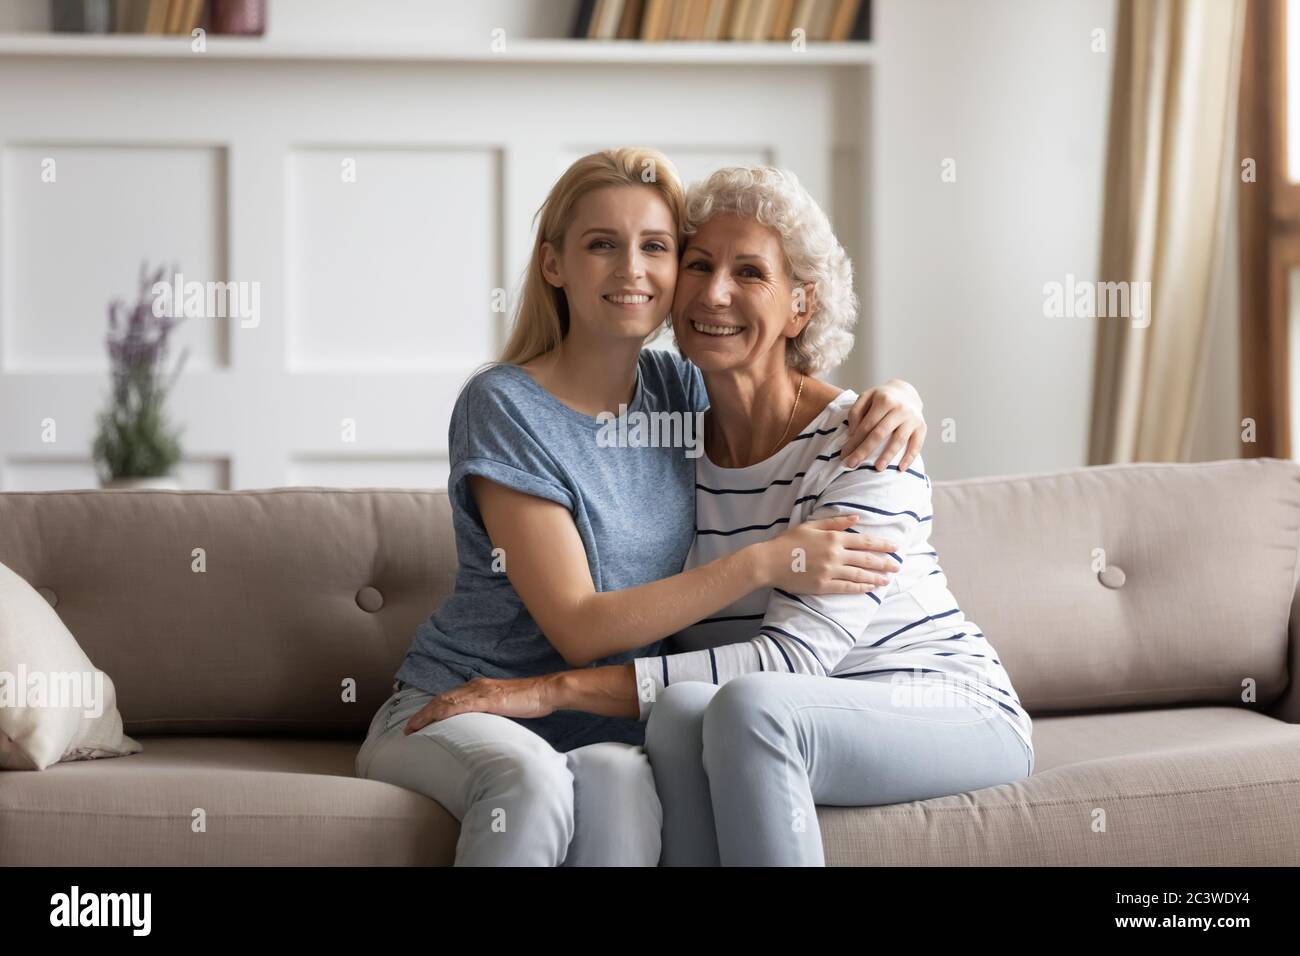 Senior mother hugs young grownup daughter sitting together on couch Stock Photo